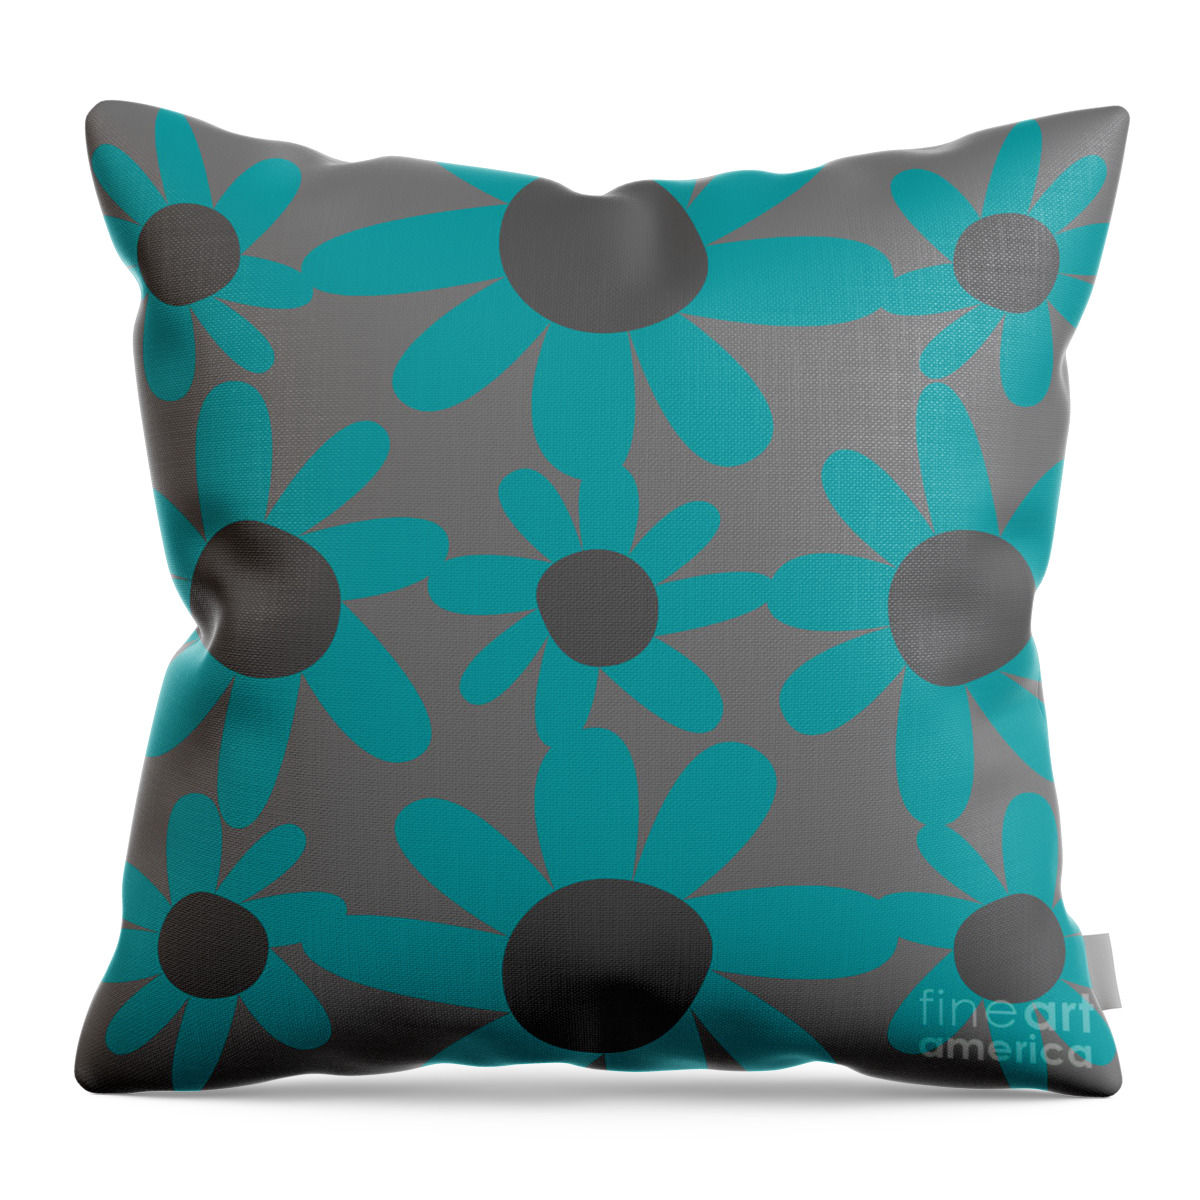 Floral Throw Pillow featuring the digital art Dark Gray and Blue Floral Pattern by Christie Olstad